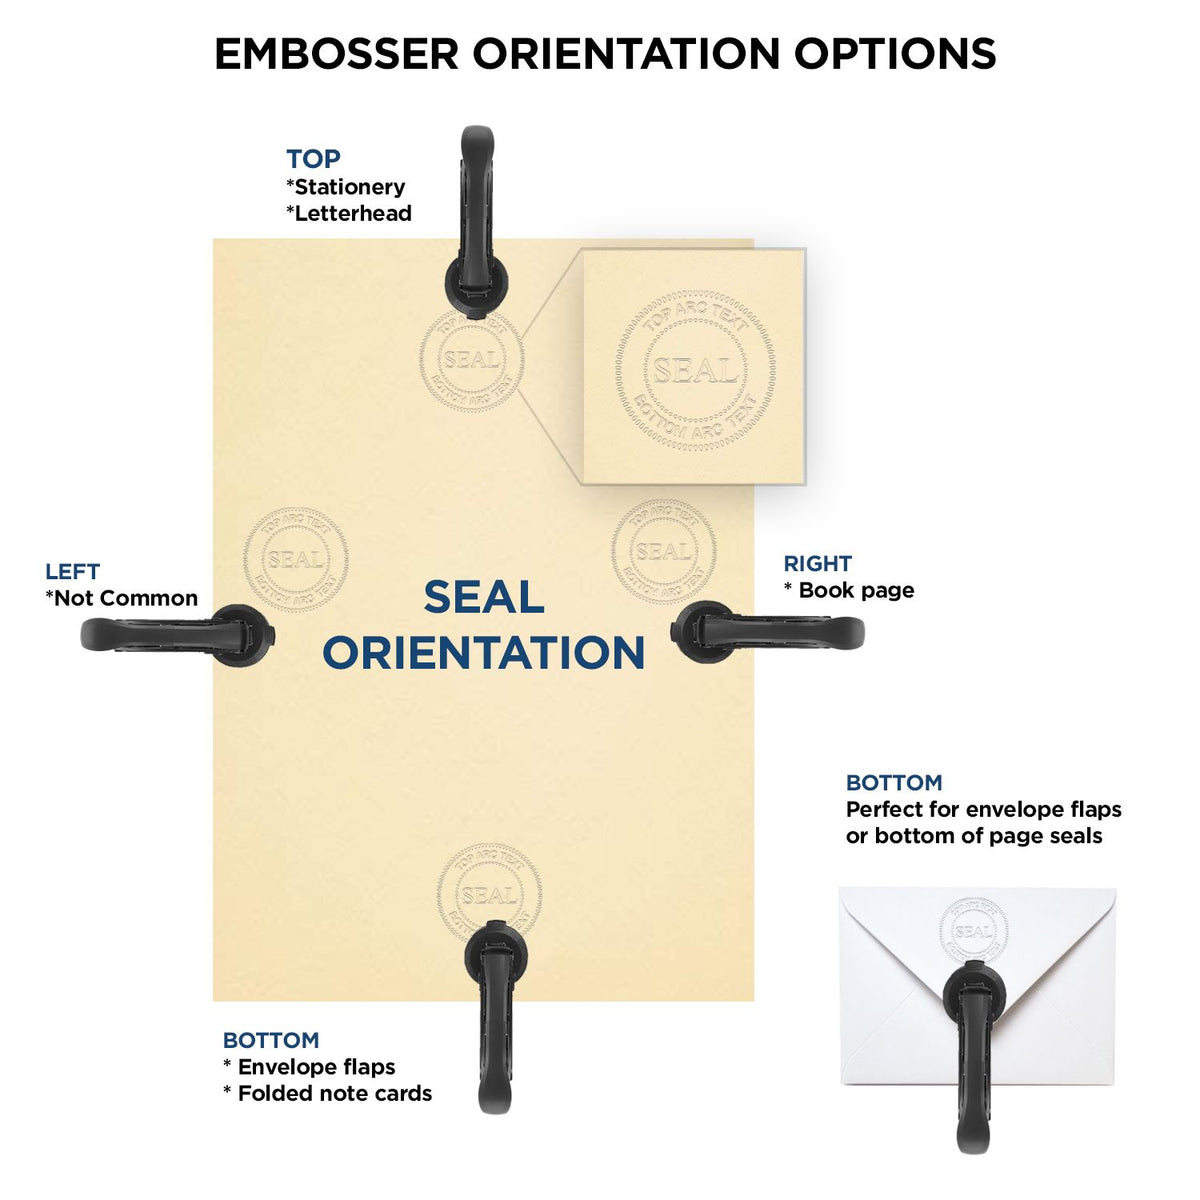 An infographic for the Connecticut Desk Architect Embossing Seal showing embosser orientation, this is showing examples of a top, bottom, right and left insert.